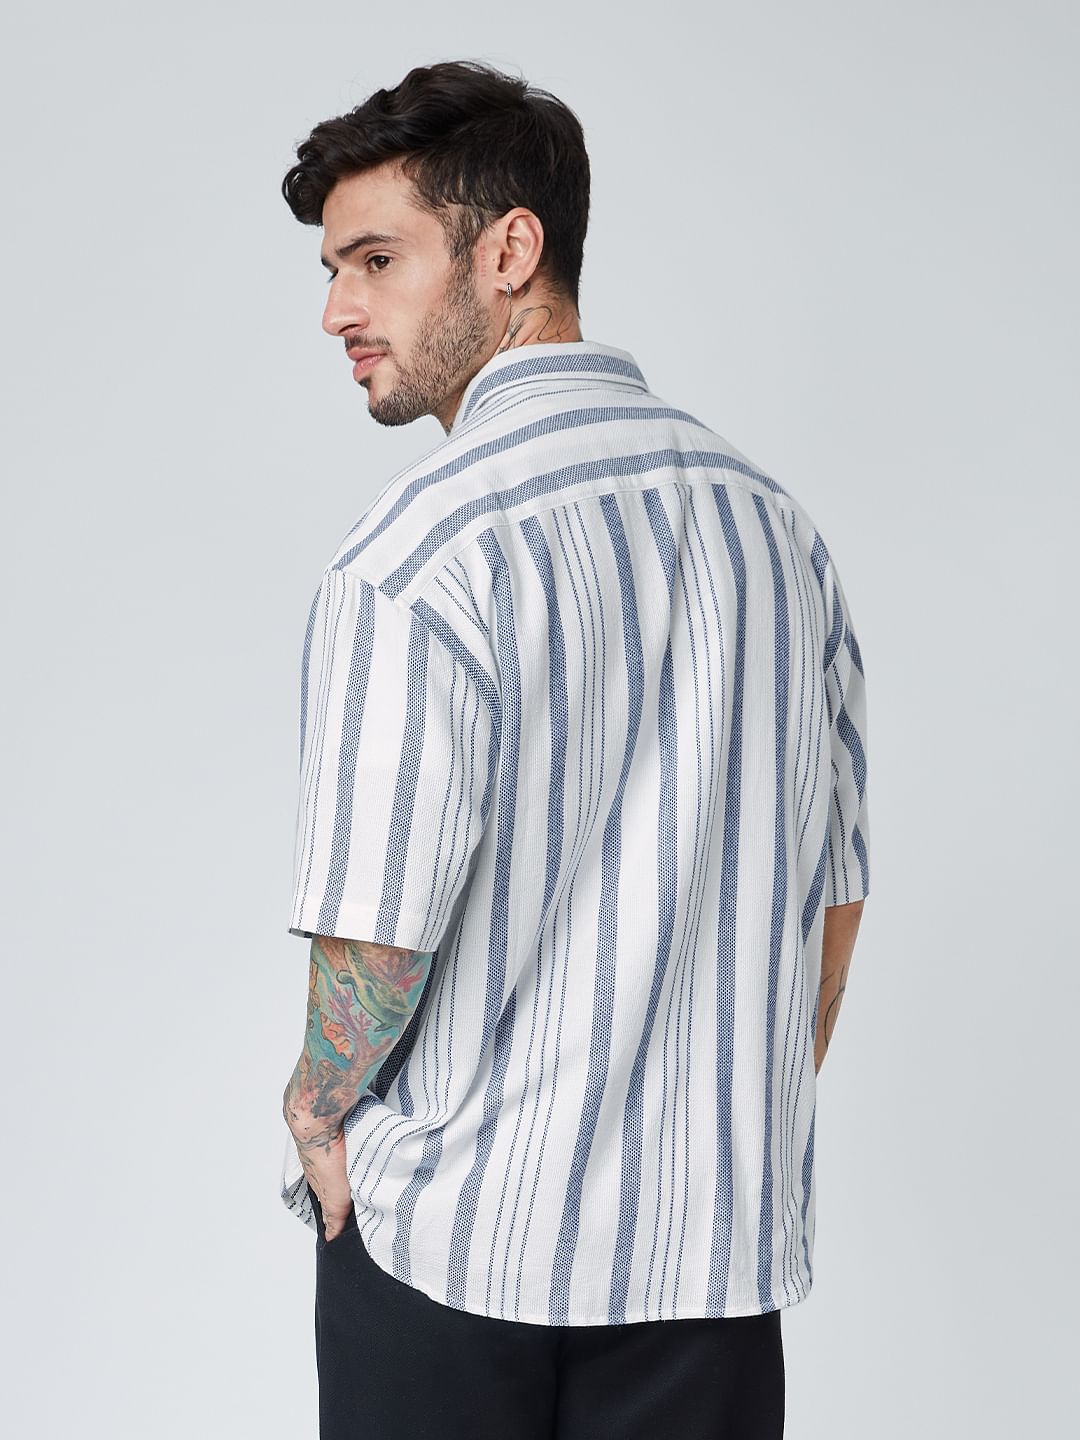 Solids: White and Grey Stripes